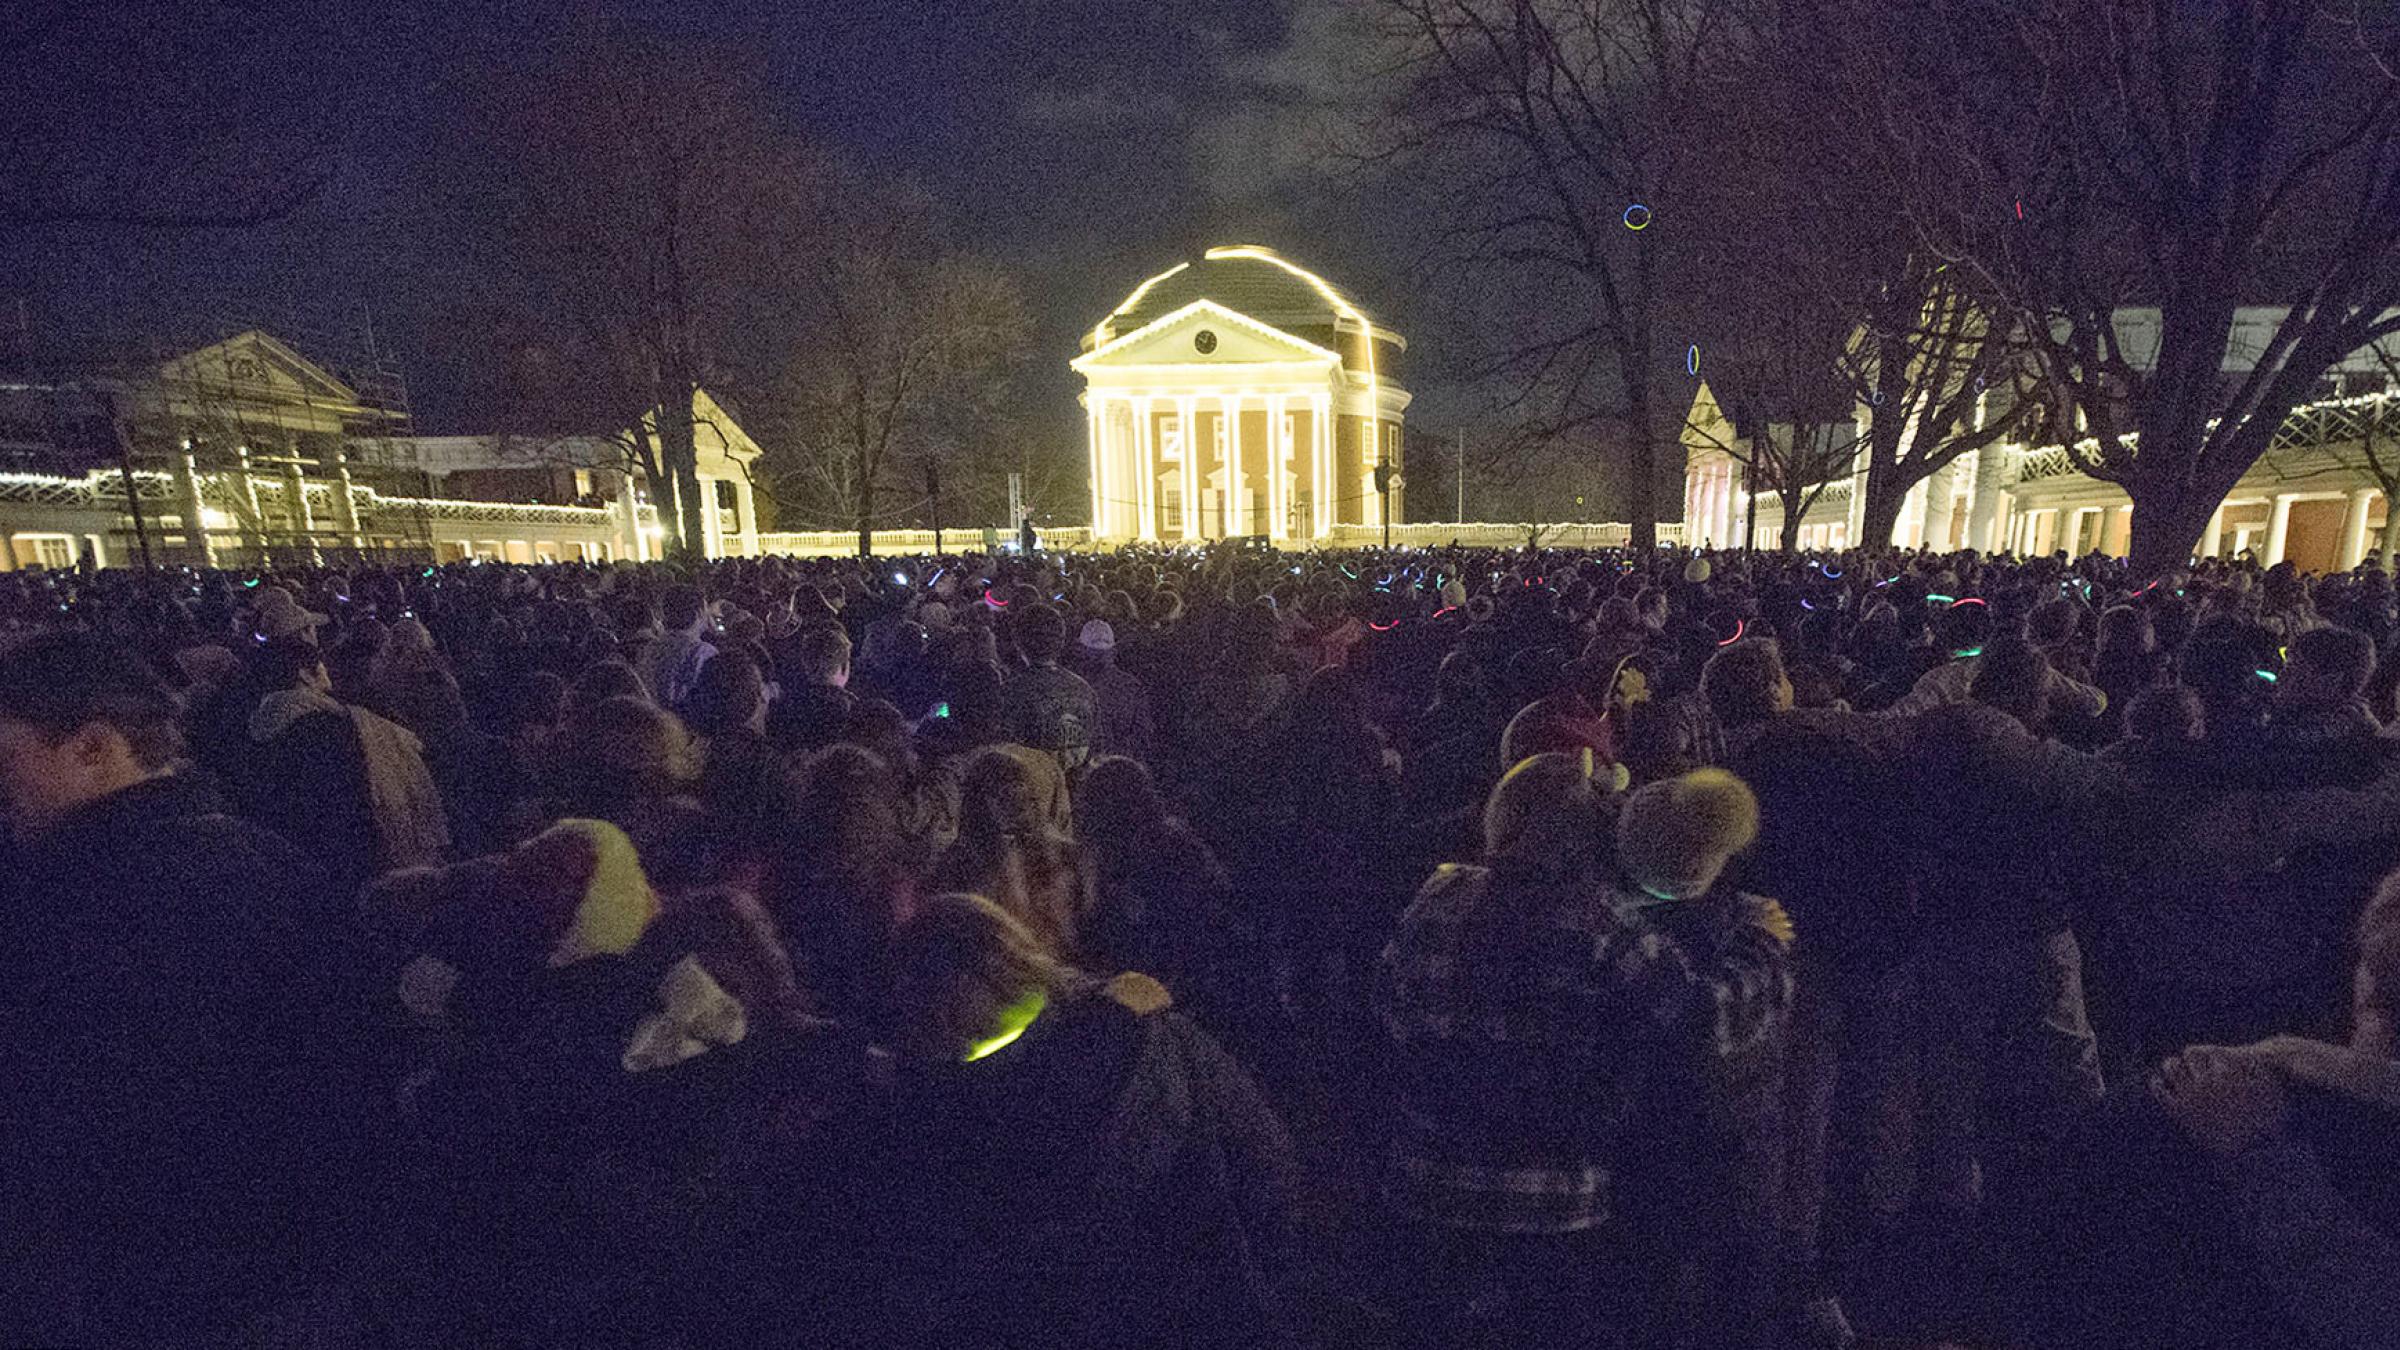 Lighting of the Lawn’ Tradition Draws Thousands to Grounds UVA Today